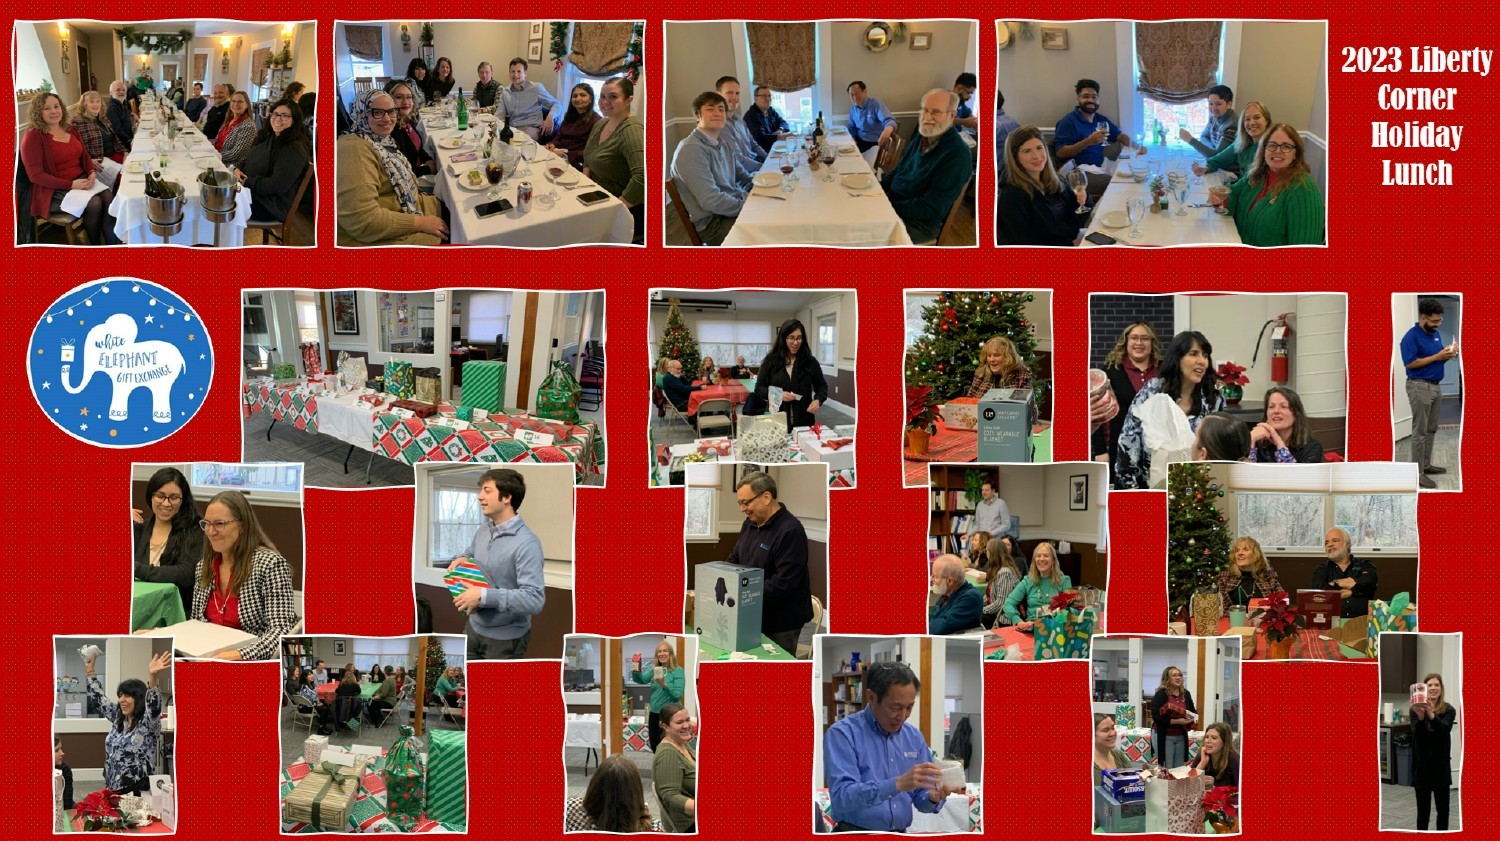 2023 Liberty Corner Holiday Lunch